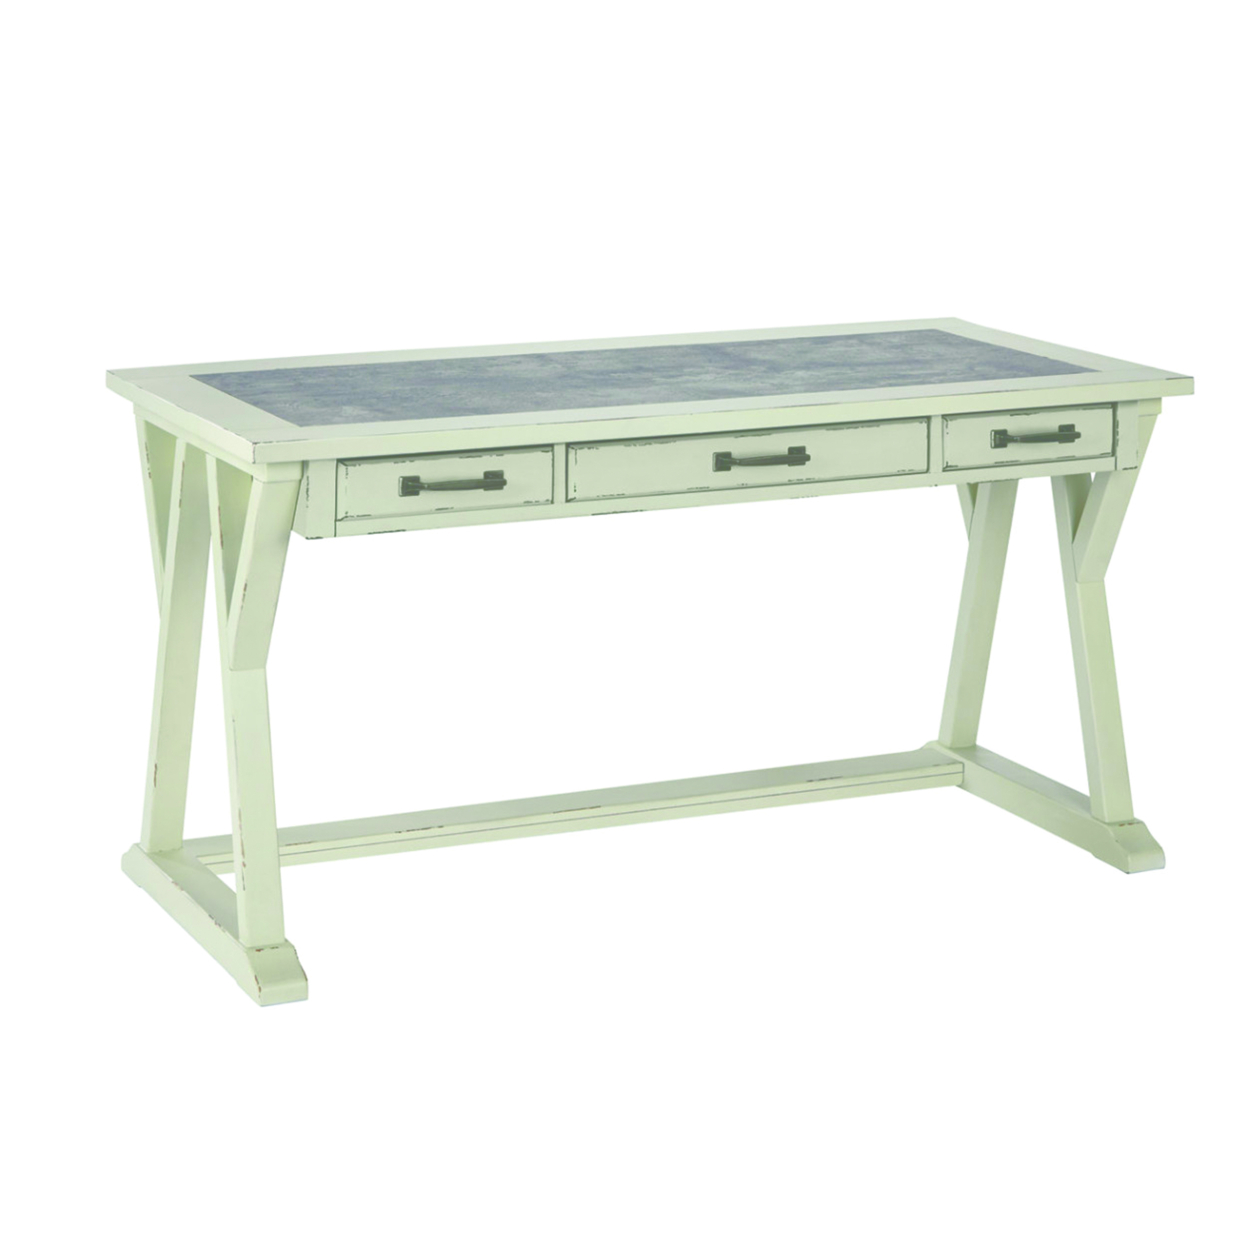 Three Drawers Wooden Desk With Faux Cement Top And Trestle Base, White And Gray- Saltoro Sherpi